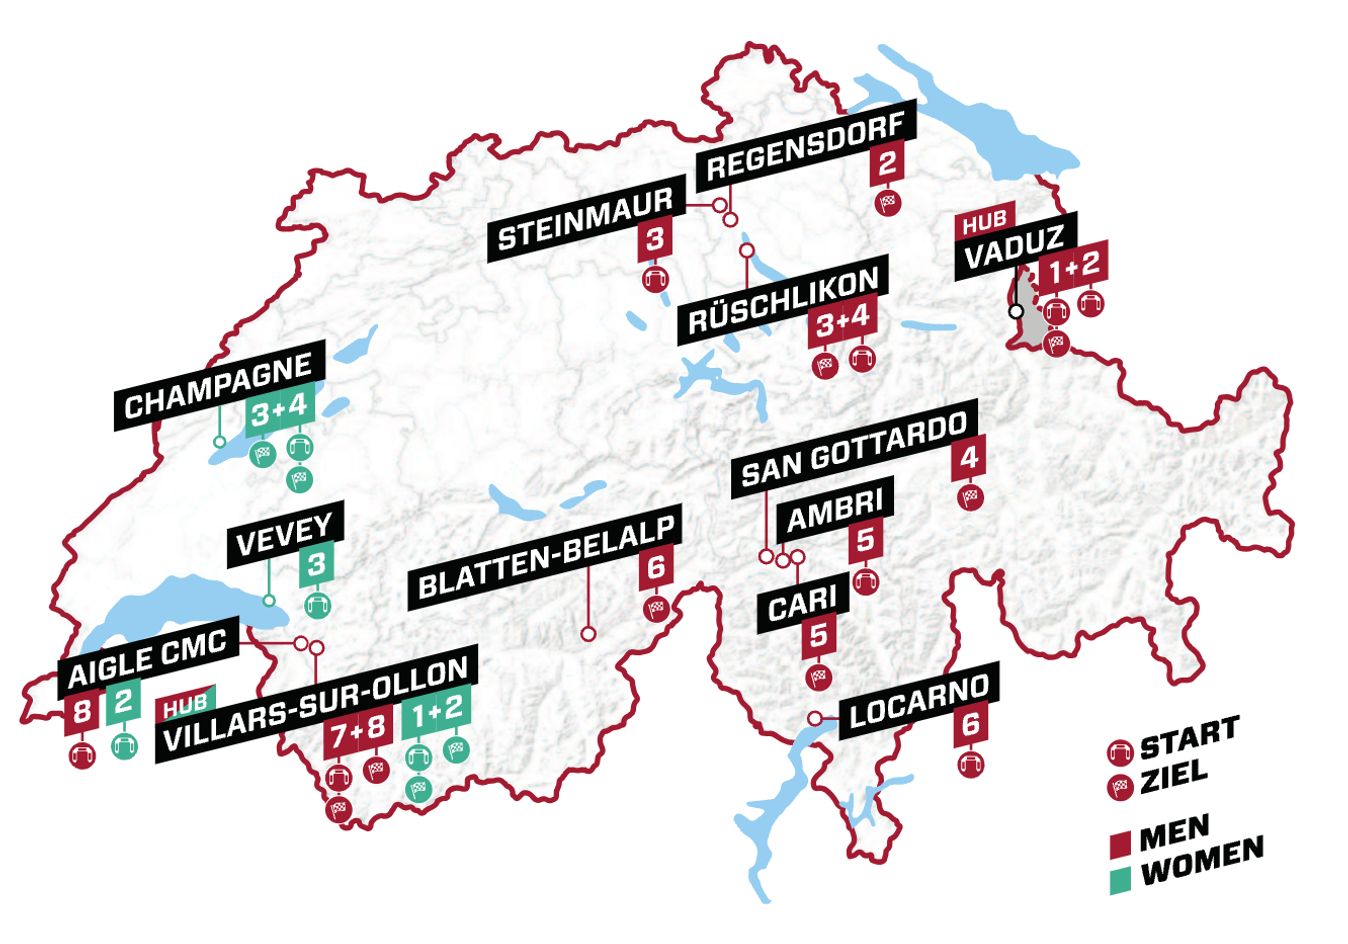 The stages of the men's and women's Tour de Suisse